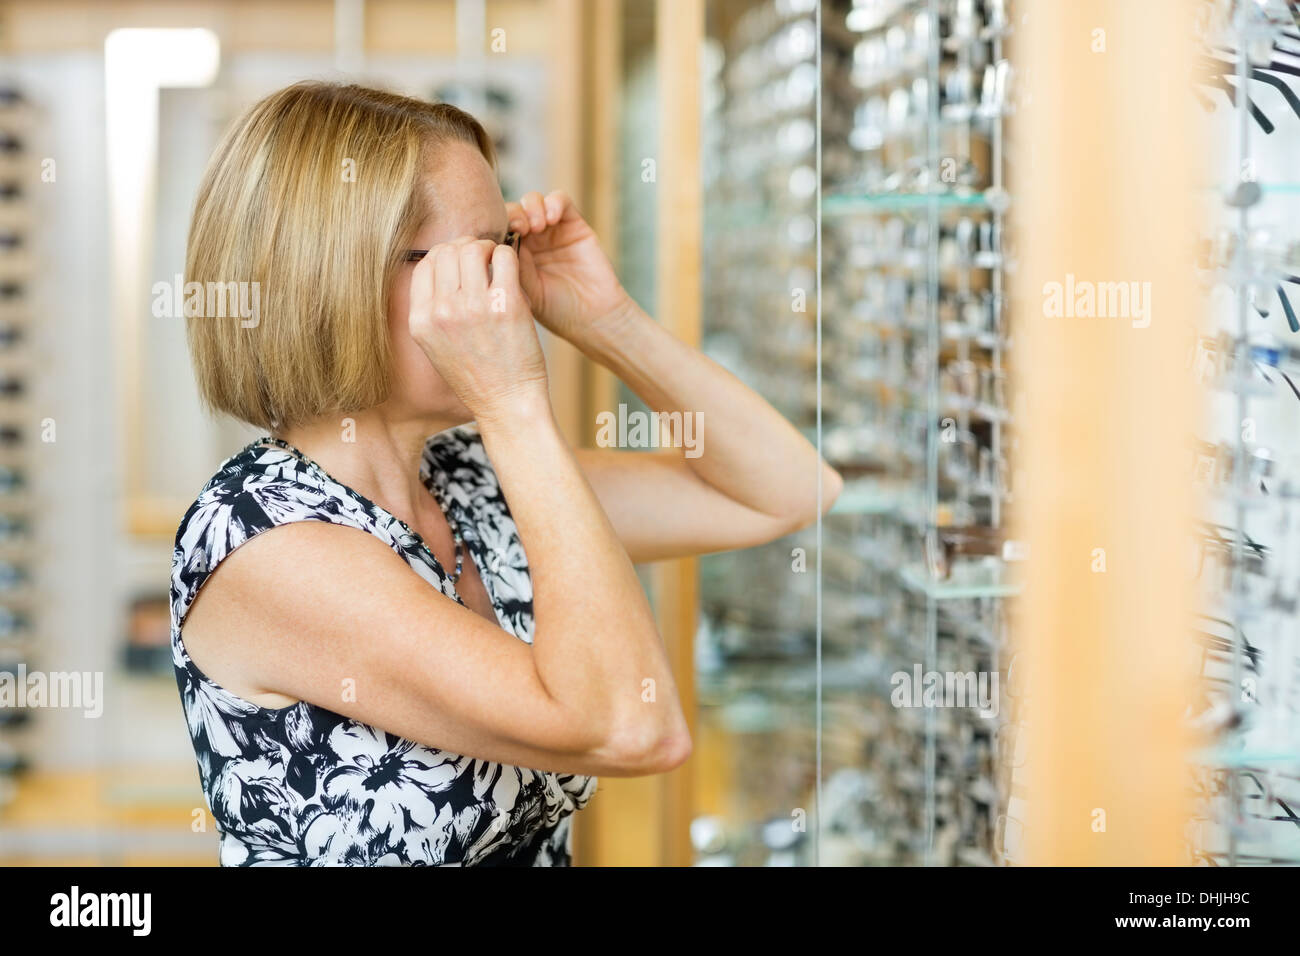 Woman Trying On Eyeglasses In Store Stock Photo